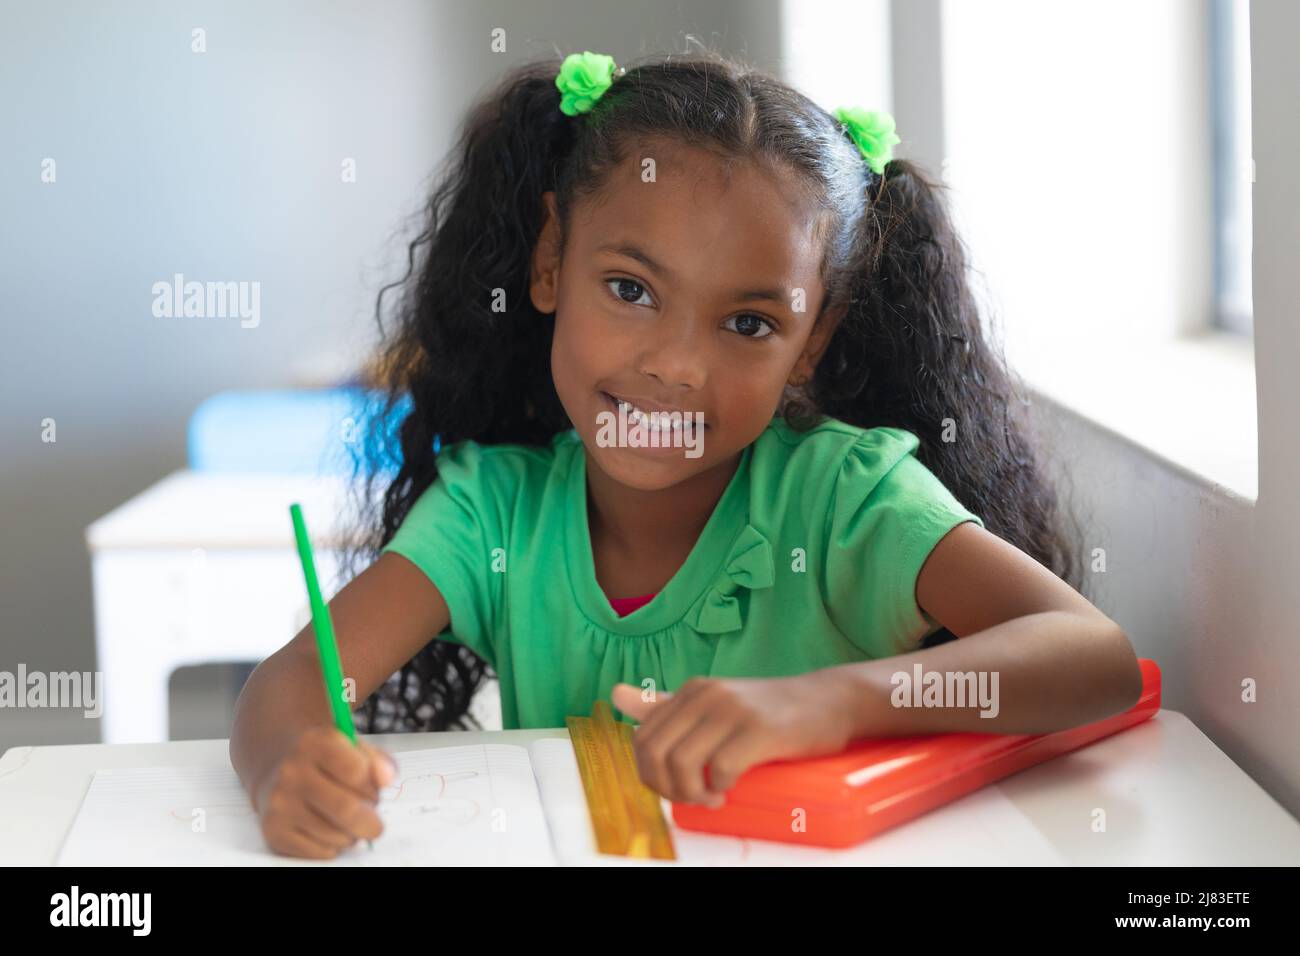 Portrait of smiling african american elementary schoolgirl with ponytails sitting at desk in class Stock Photo